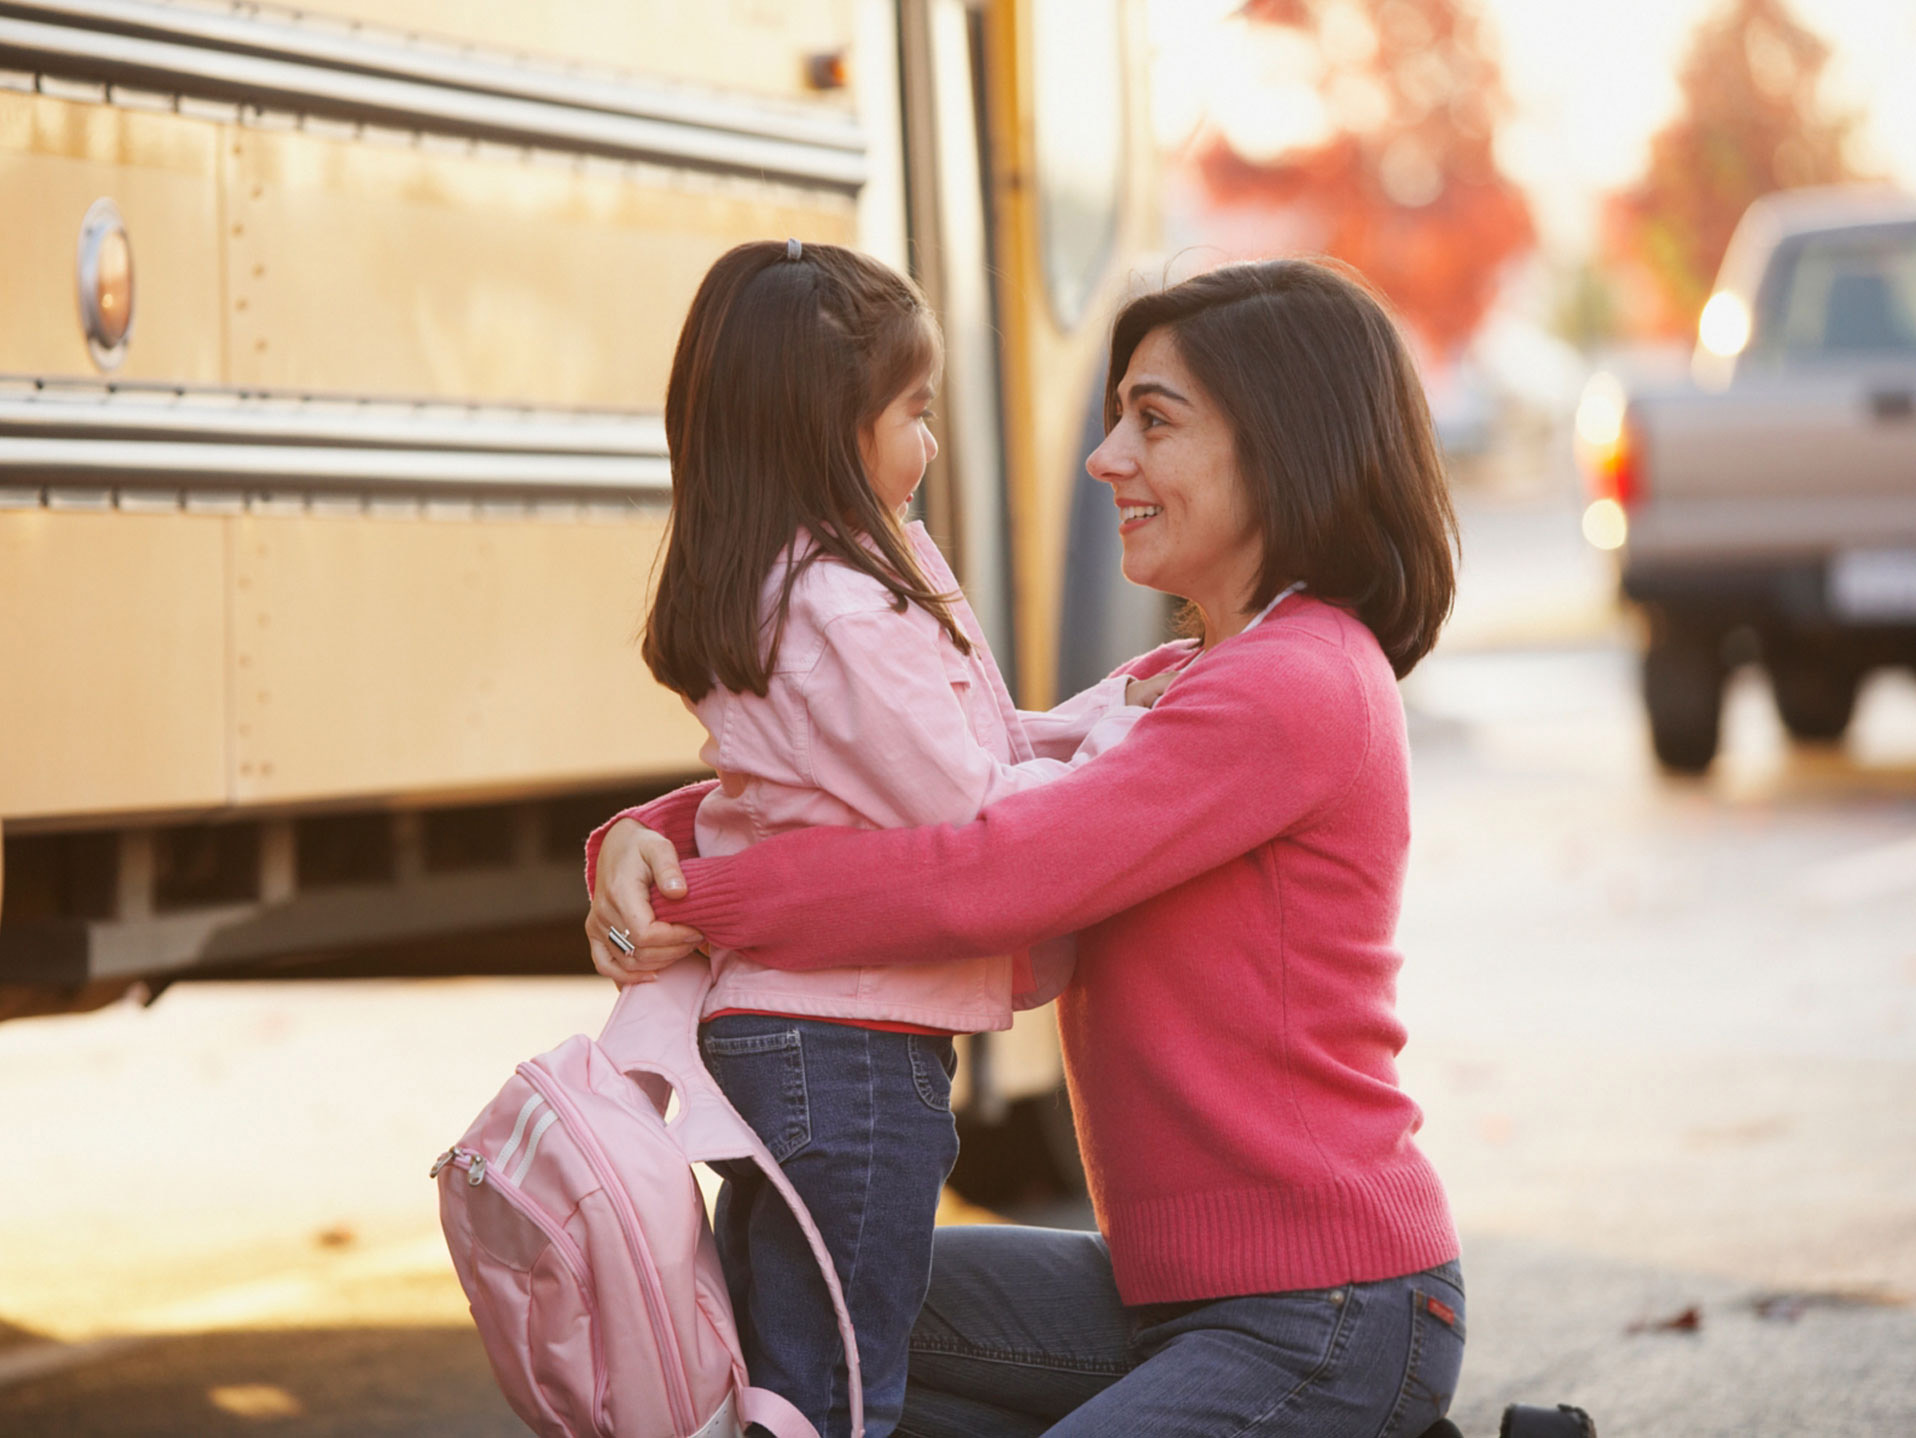 Daughters search. Pick up from School. Pick up children from School. Mother School. Back in School mother.